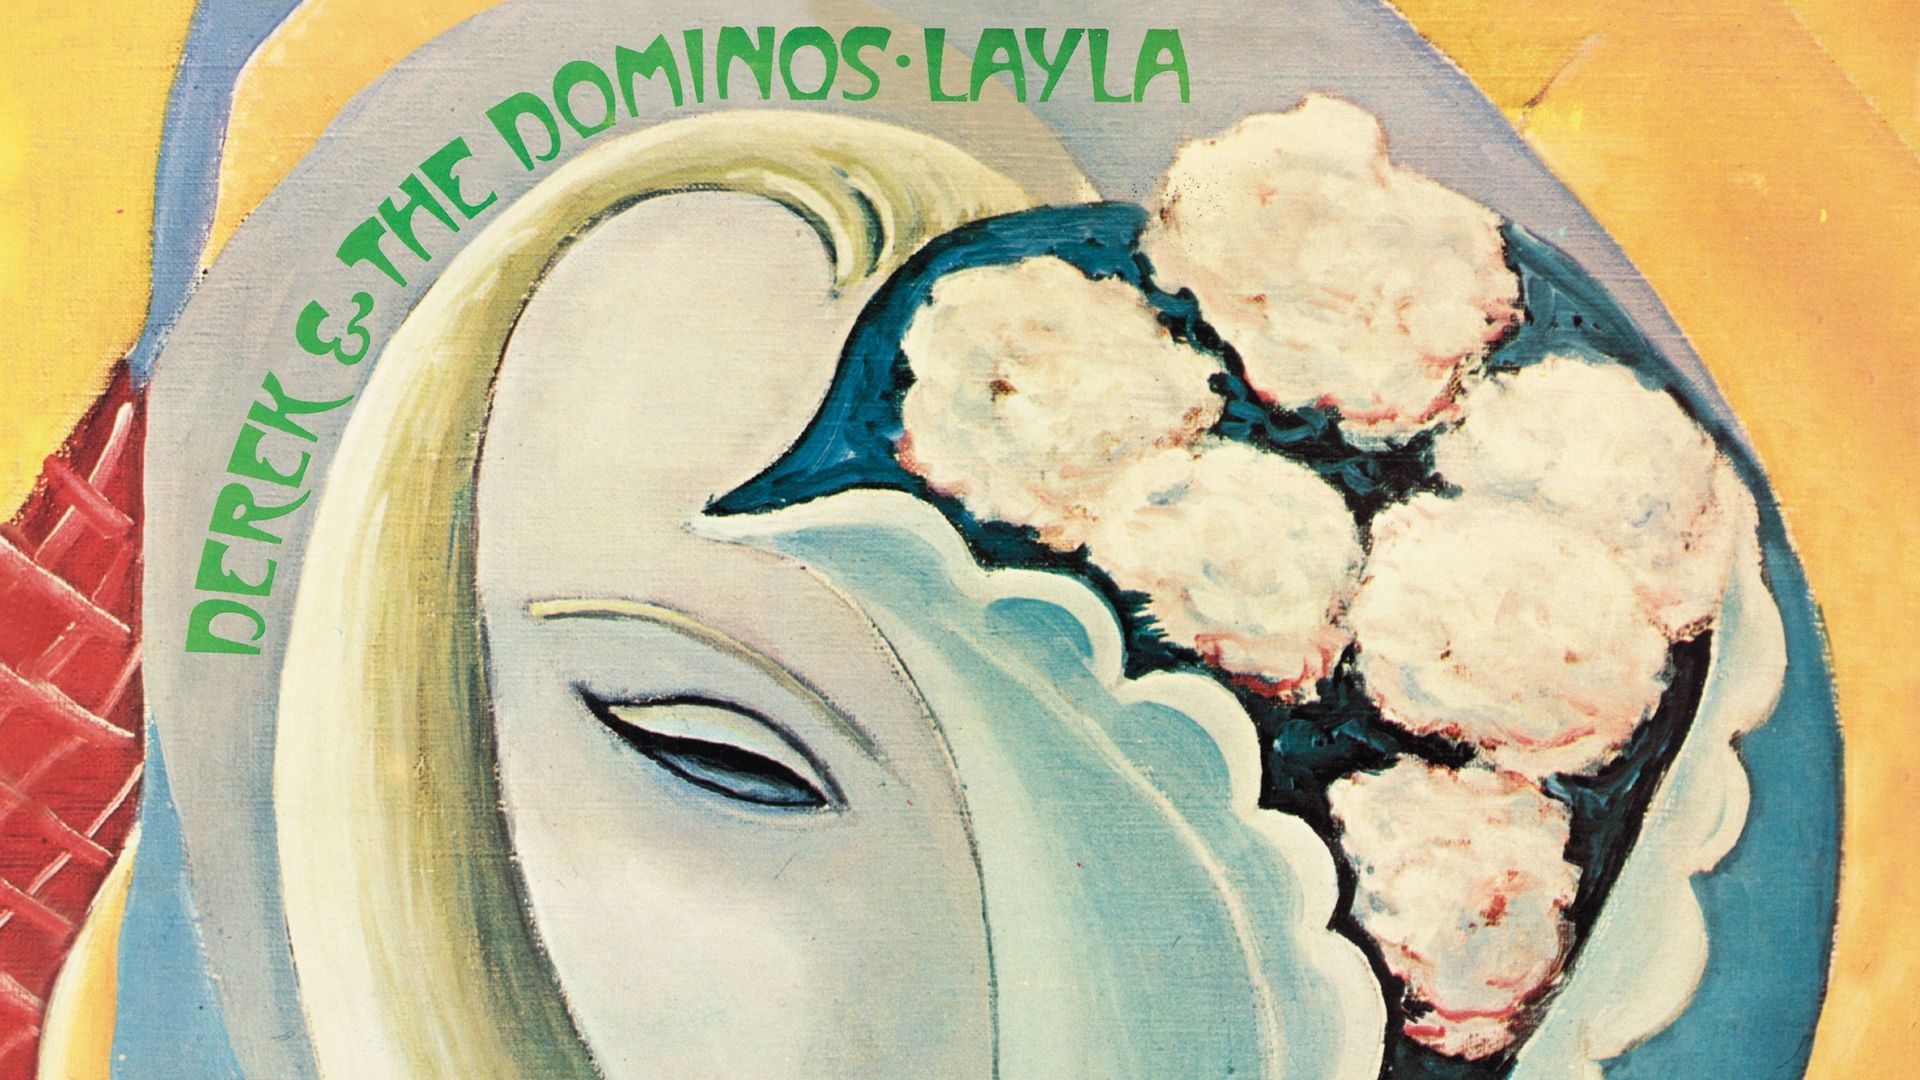 Les 50 ans de "Layla and Other Assorted Love Songs" de Derek and the Dominos